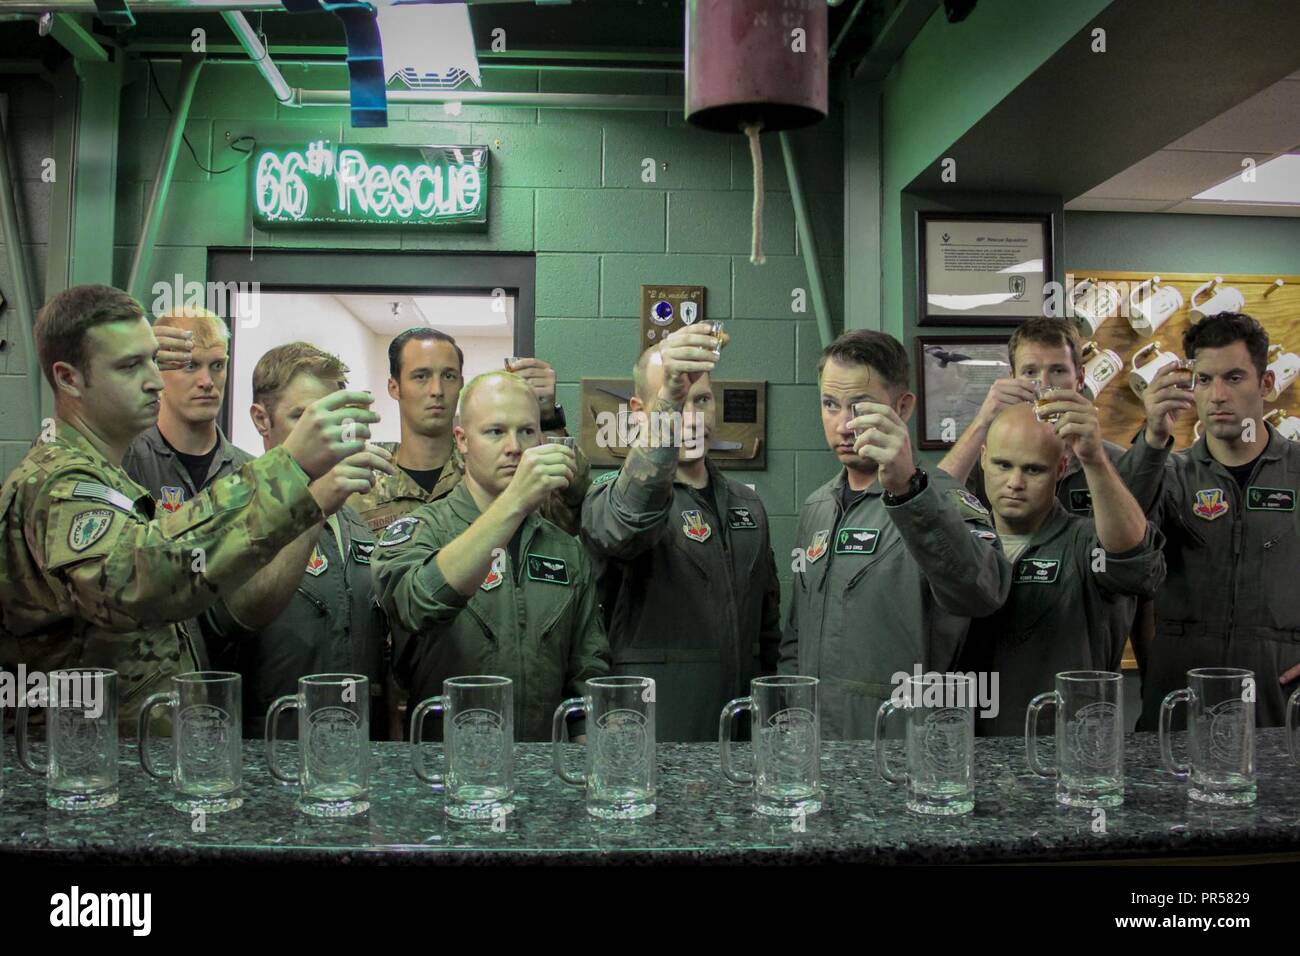 Members Of The 66th Rescue Squadron Line Up To Honor Their Fallen Brothers In A Toast To Jolly 38 And Jolly 39 Sept 7 18 At Nellis Air Force Base Nevada The